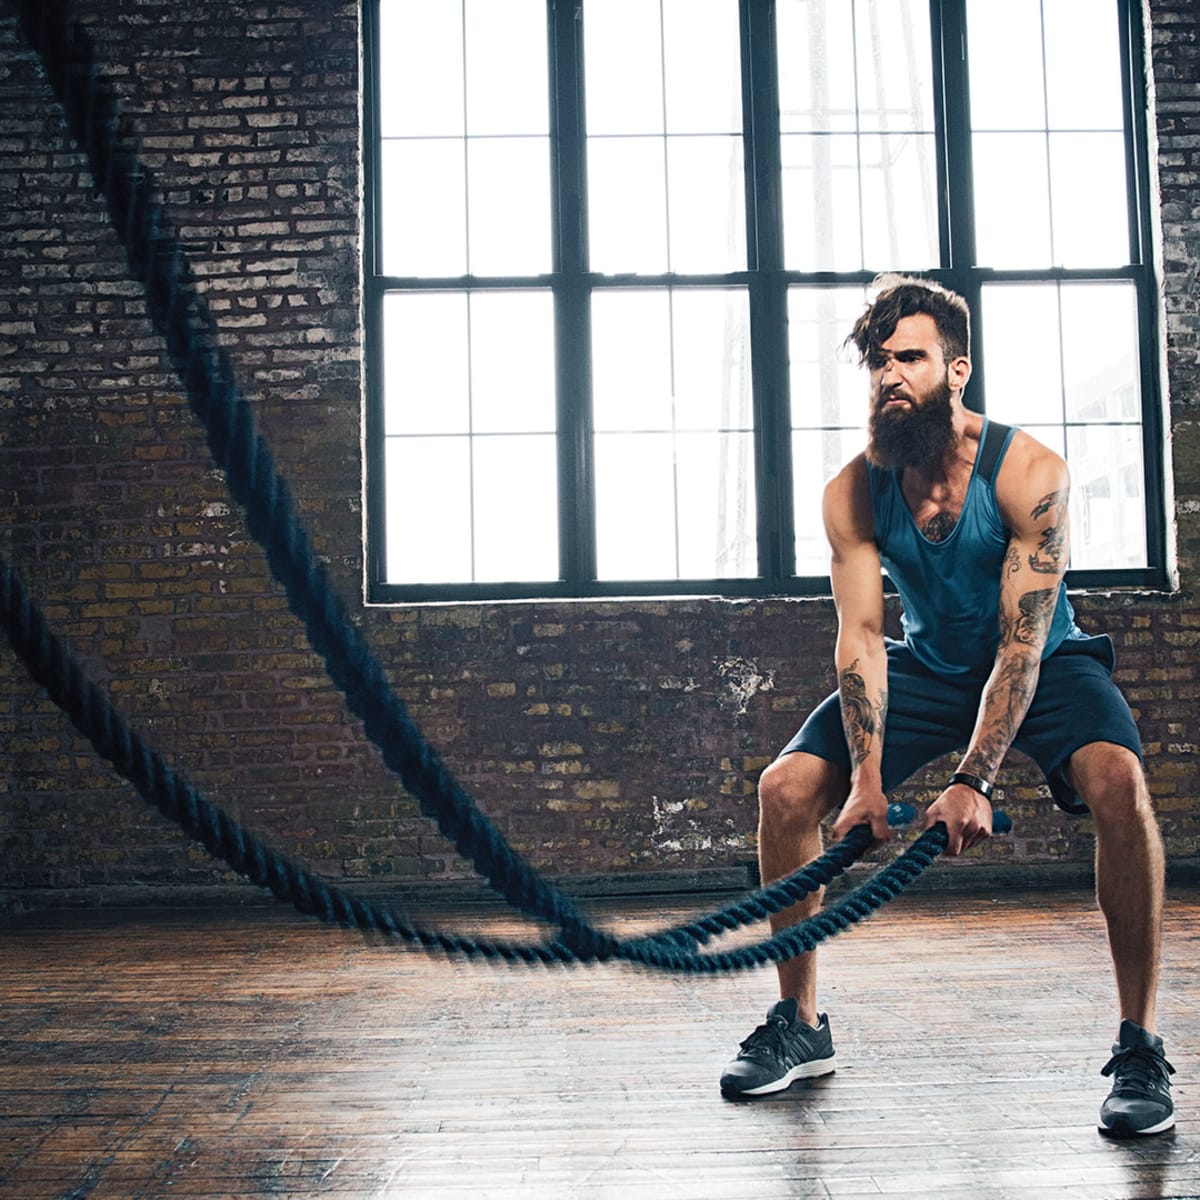 10 intense battle rope moves that'll transform your entire body